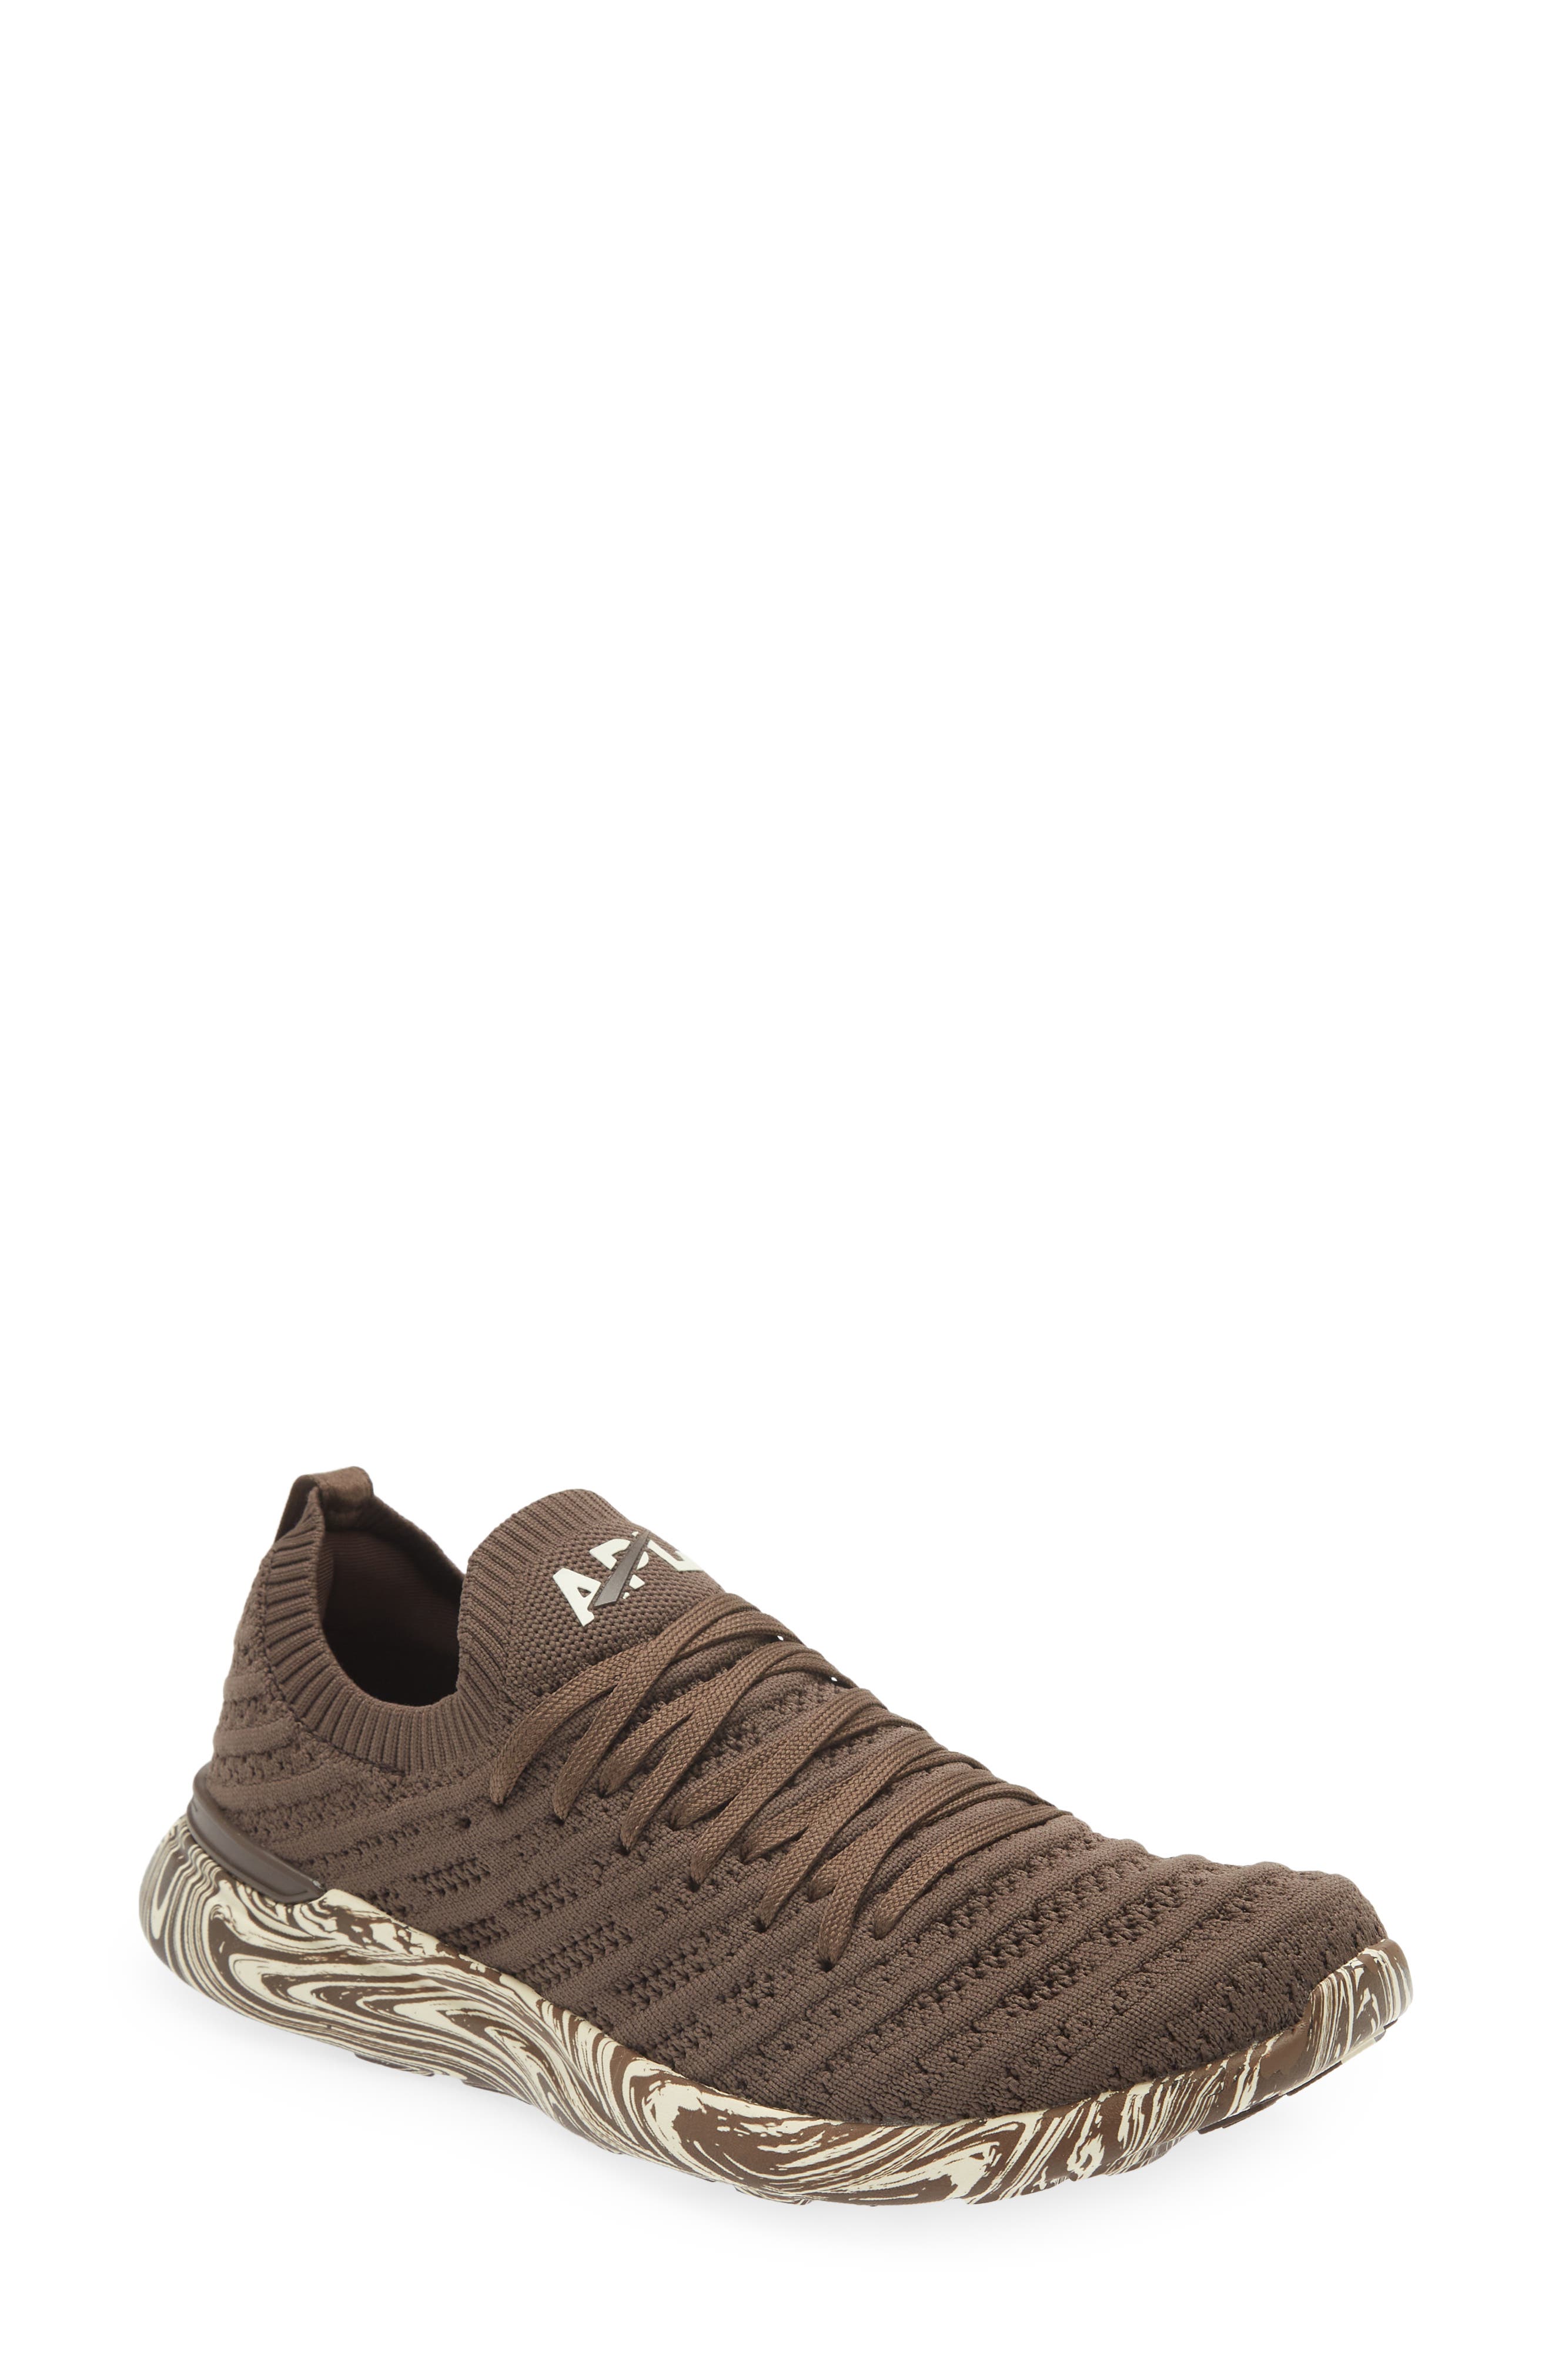 brown running shoes womens